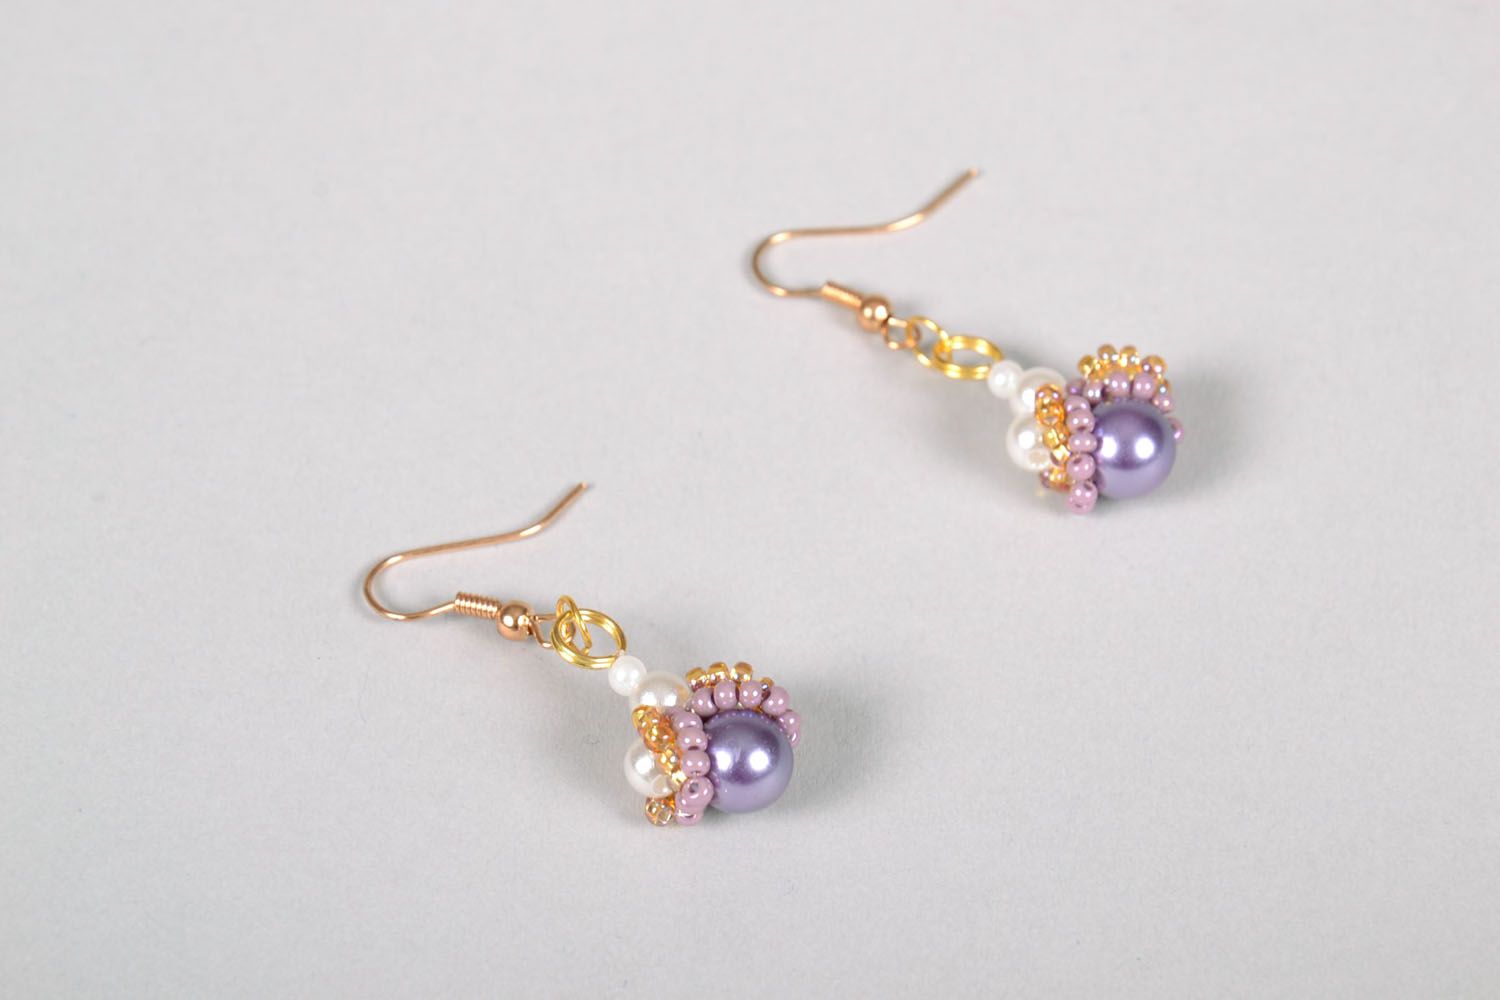 Beaded earrings with charms photo 3